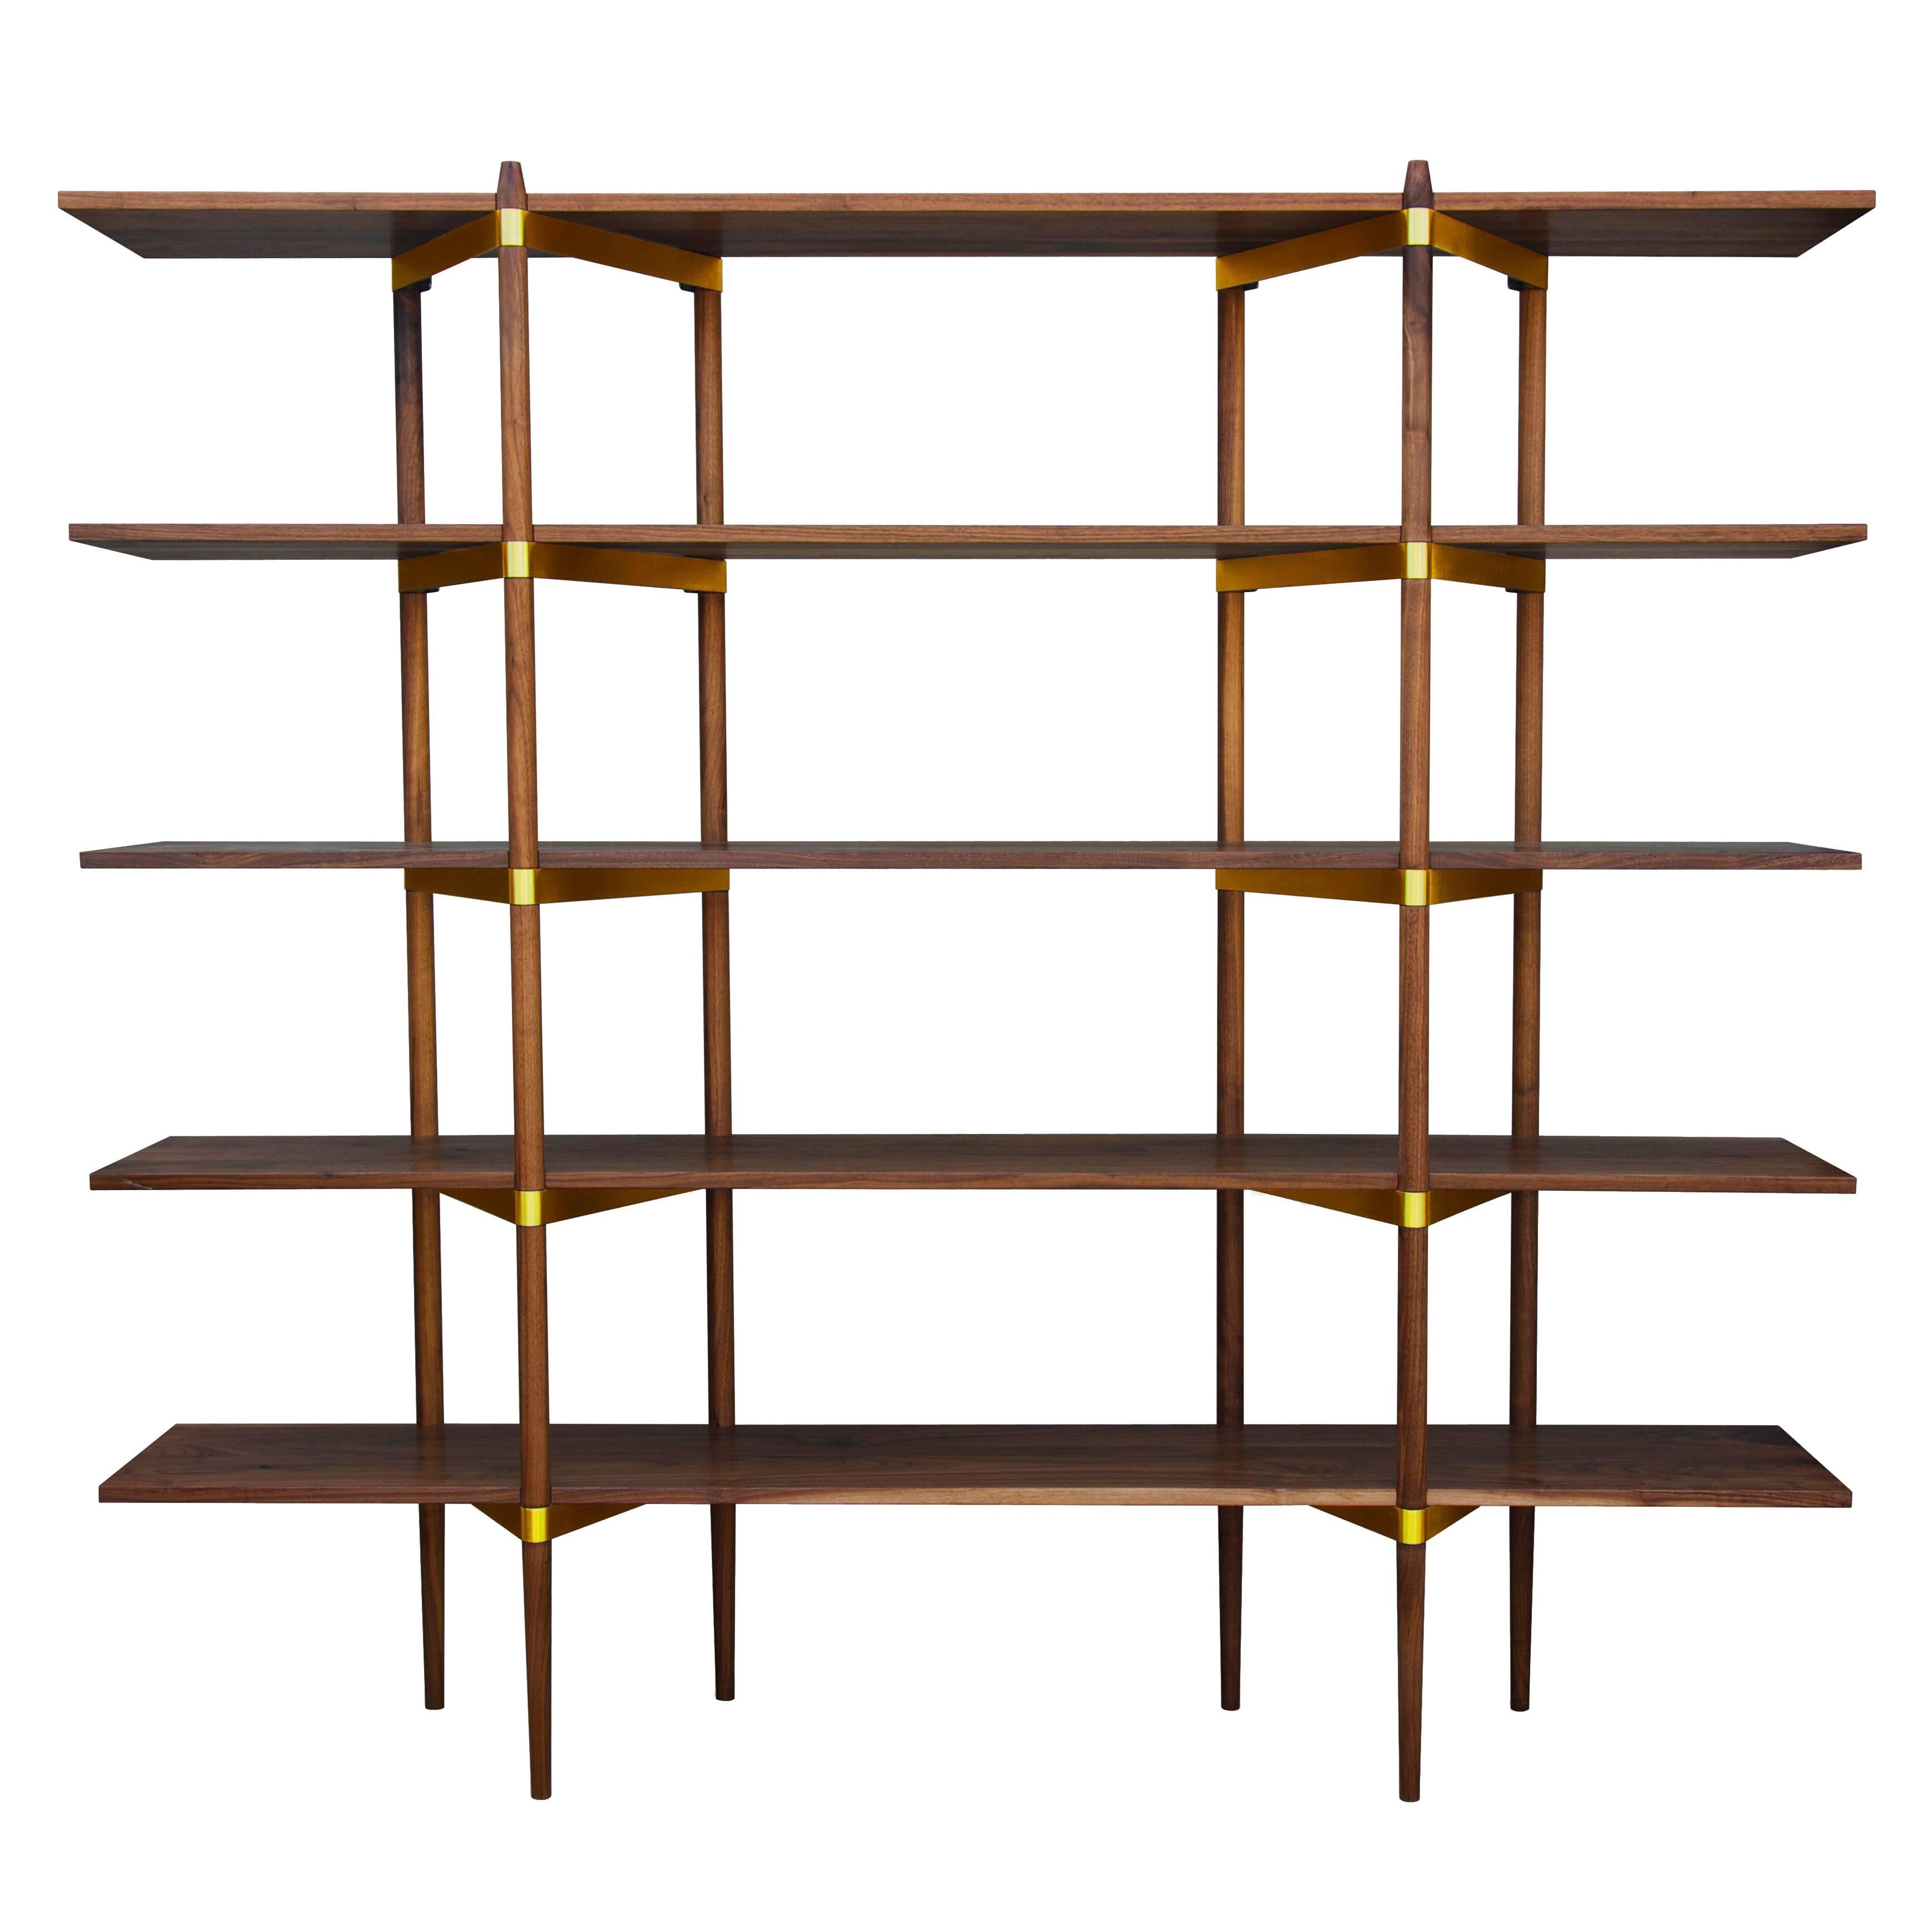 Casey Lurie Studio Modern High "Primo" Shelving System in Walnut with Brass